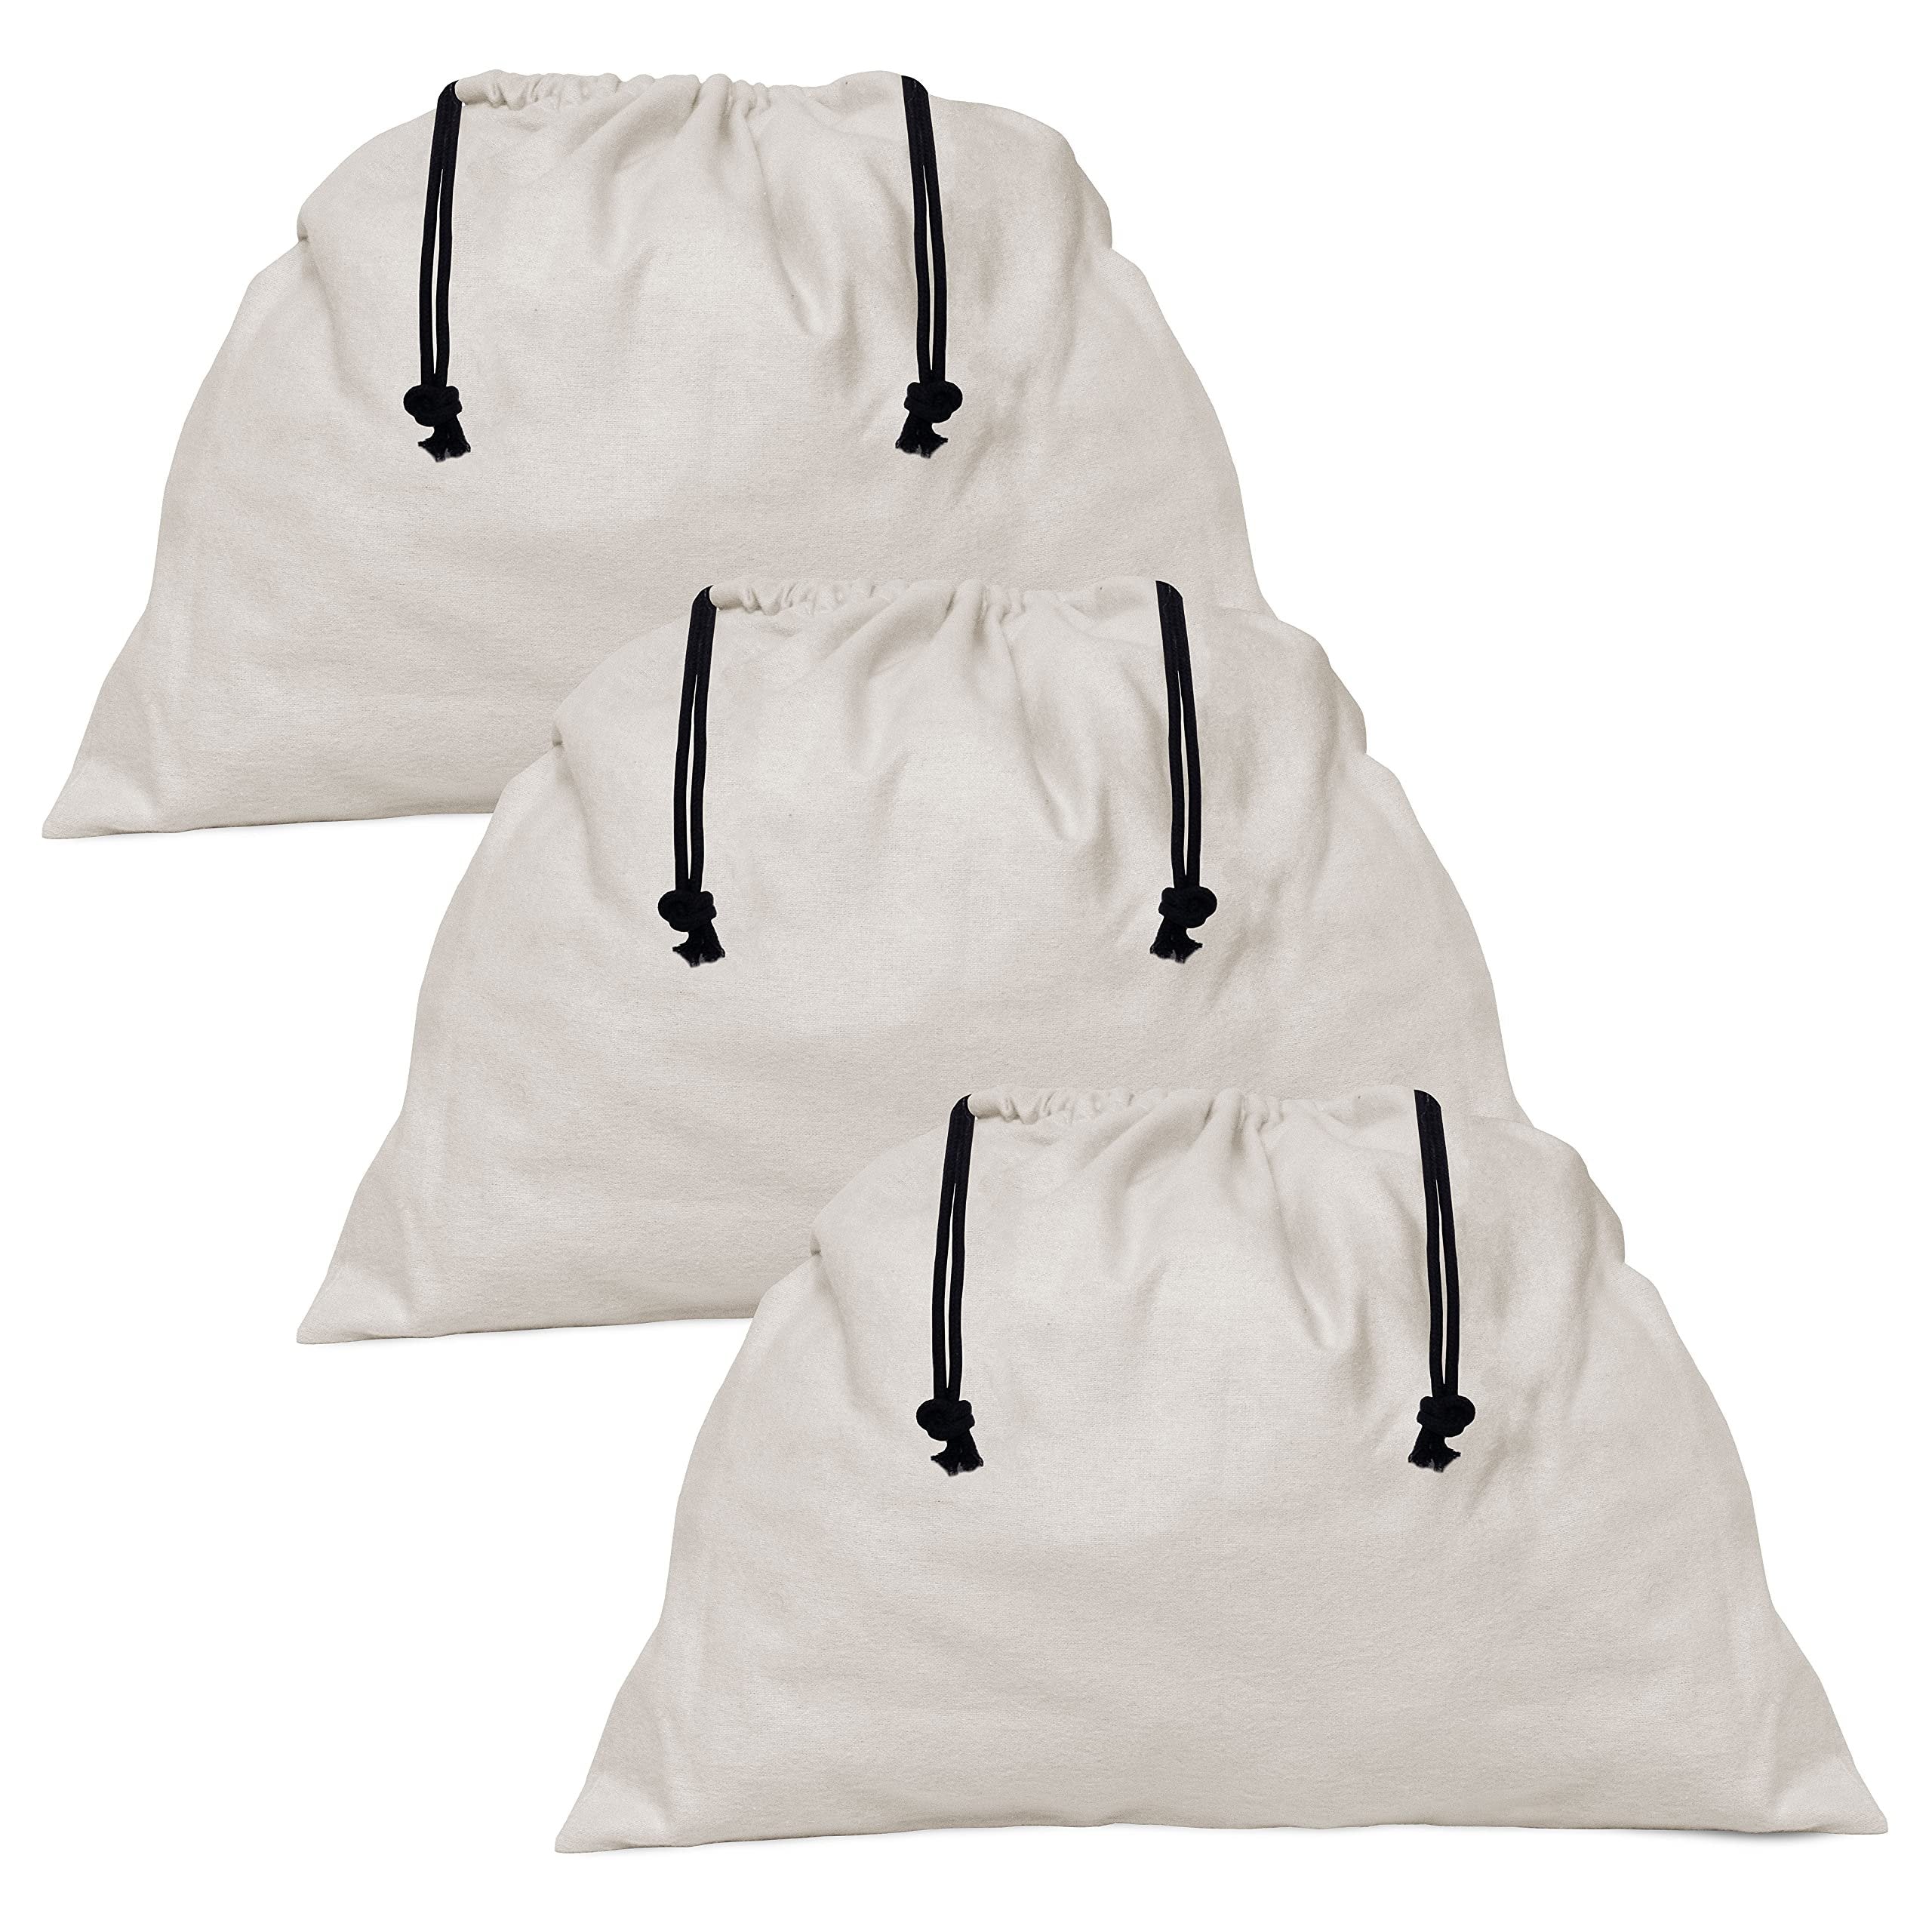 Dust Bags for Handbags - 3 Pack Flannel Duster Bags, Large Cotton Fabr